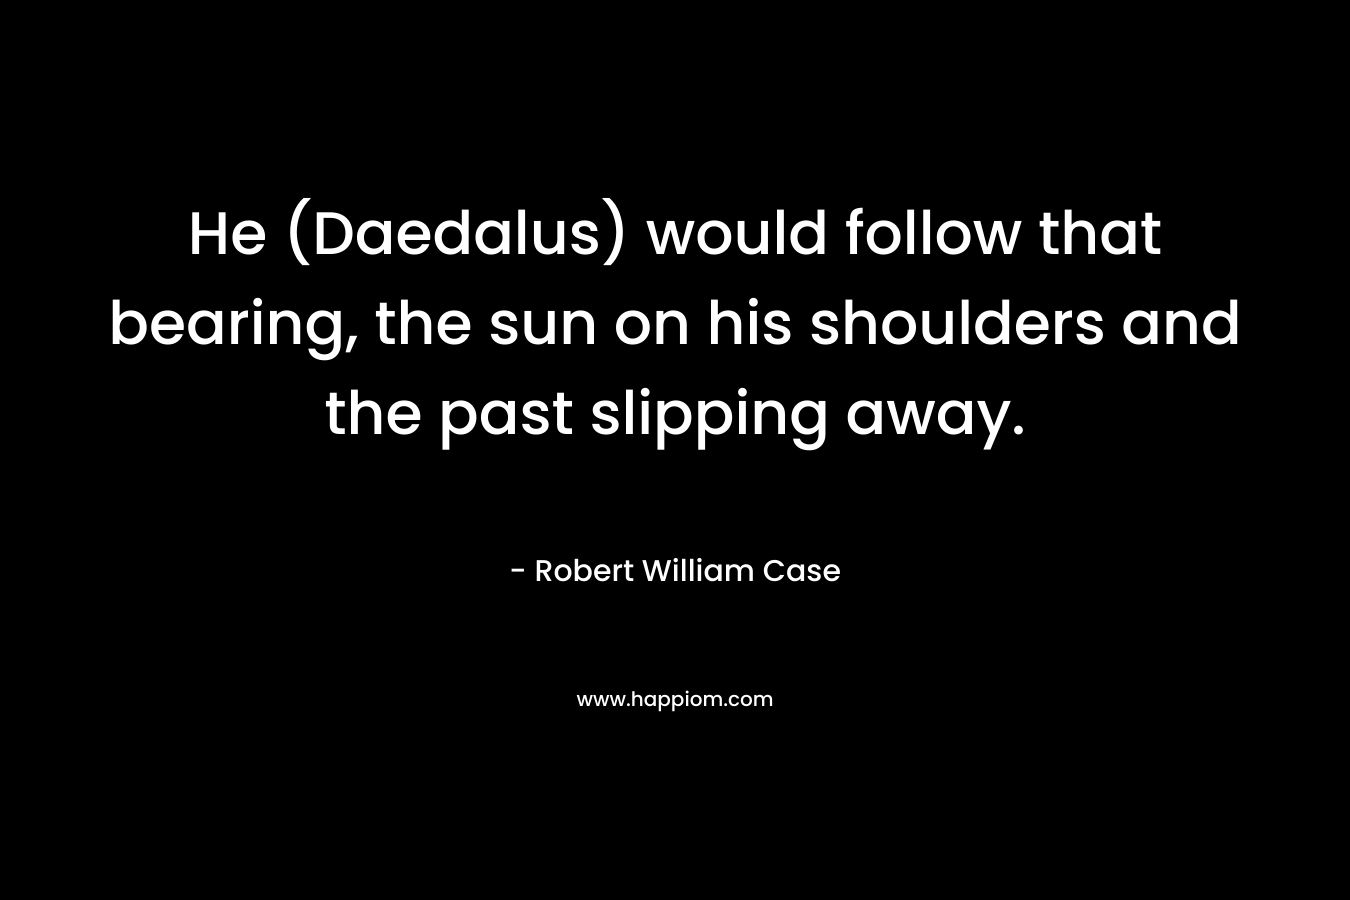 He (Daedalus) would follow that bearing, the sun on his shoulders and the past slipping away. – Robert William Case